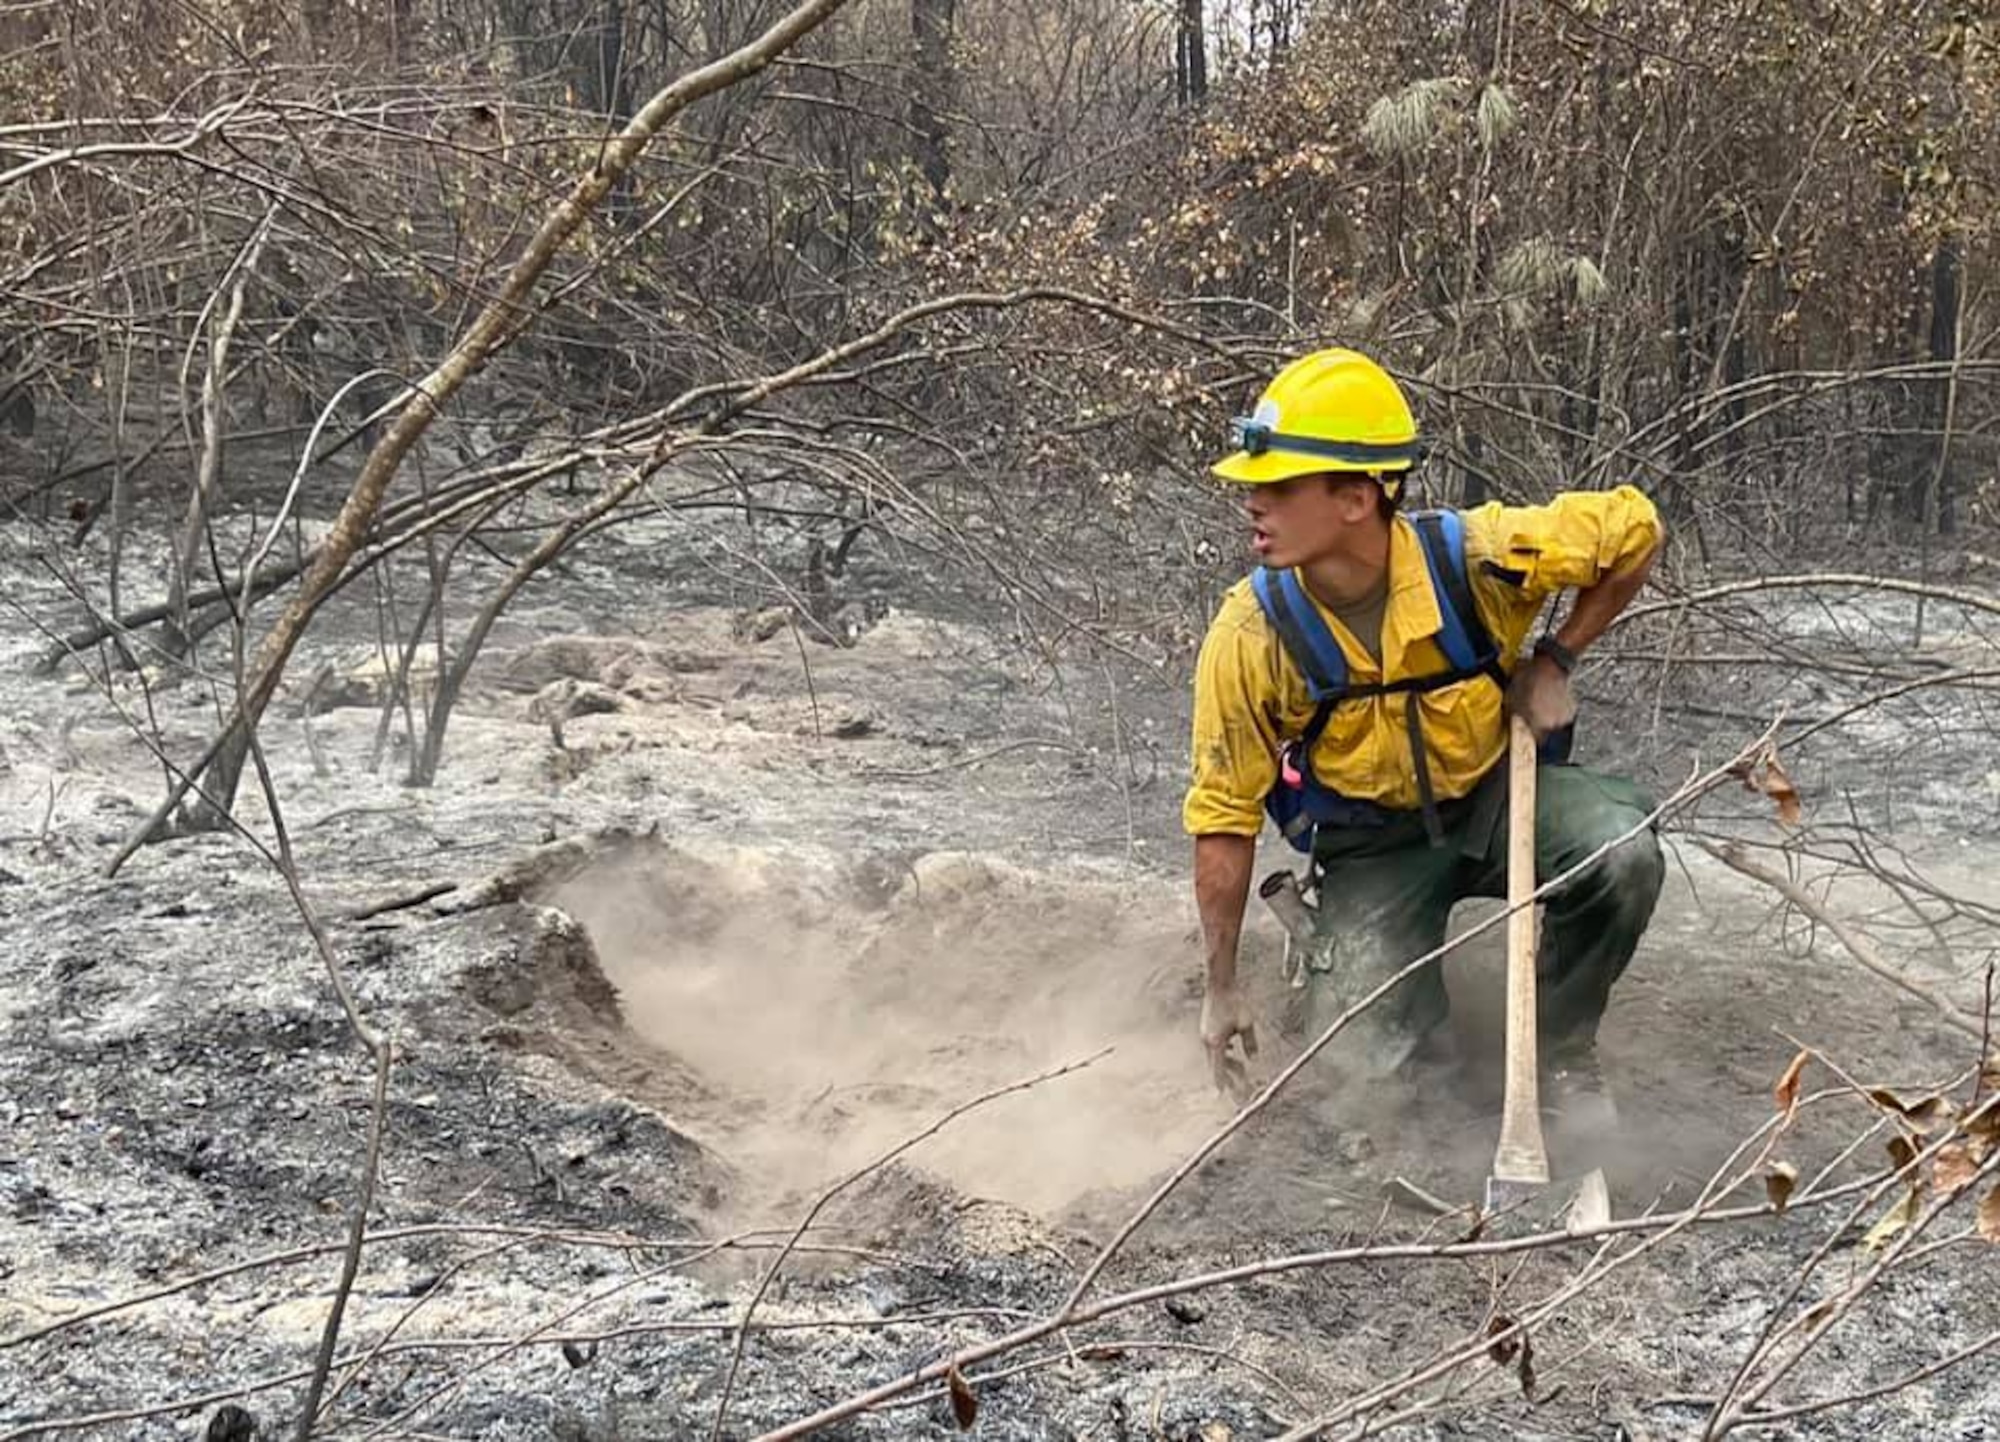 Airman searches for fire hotspots